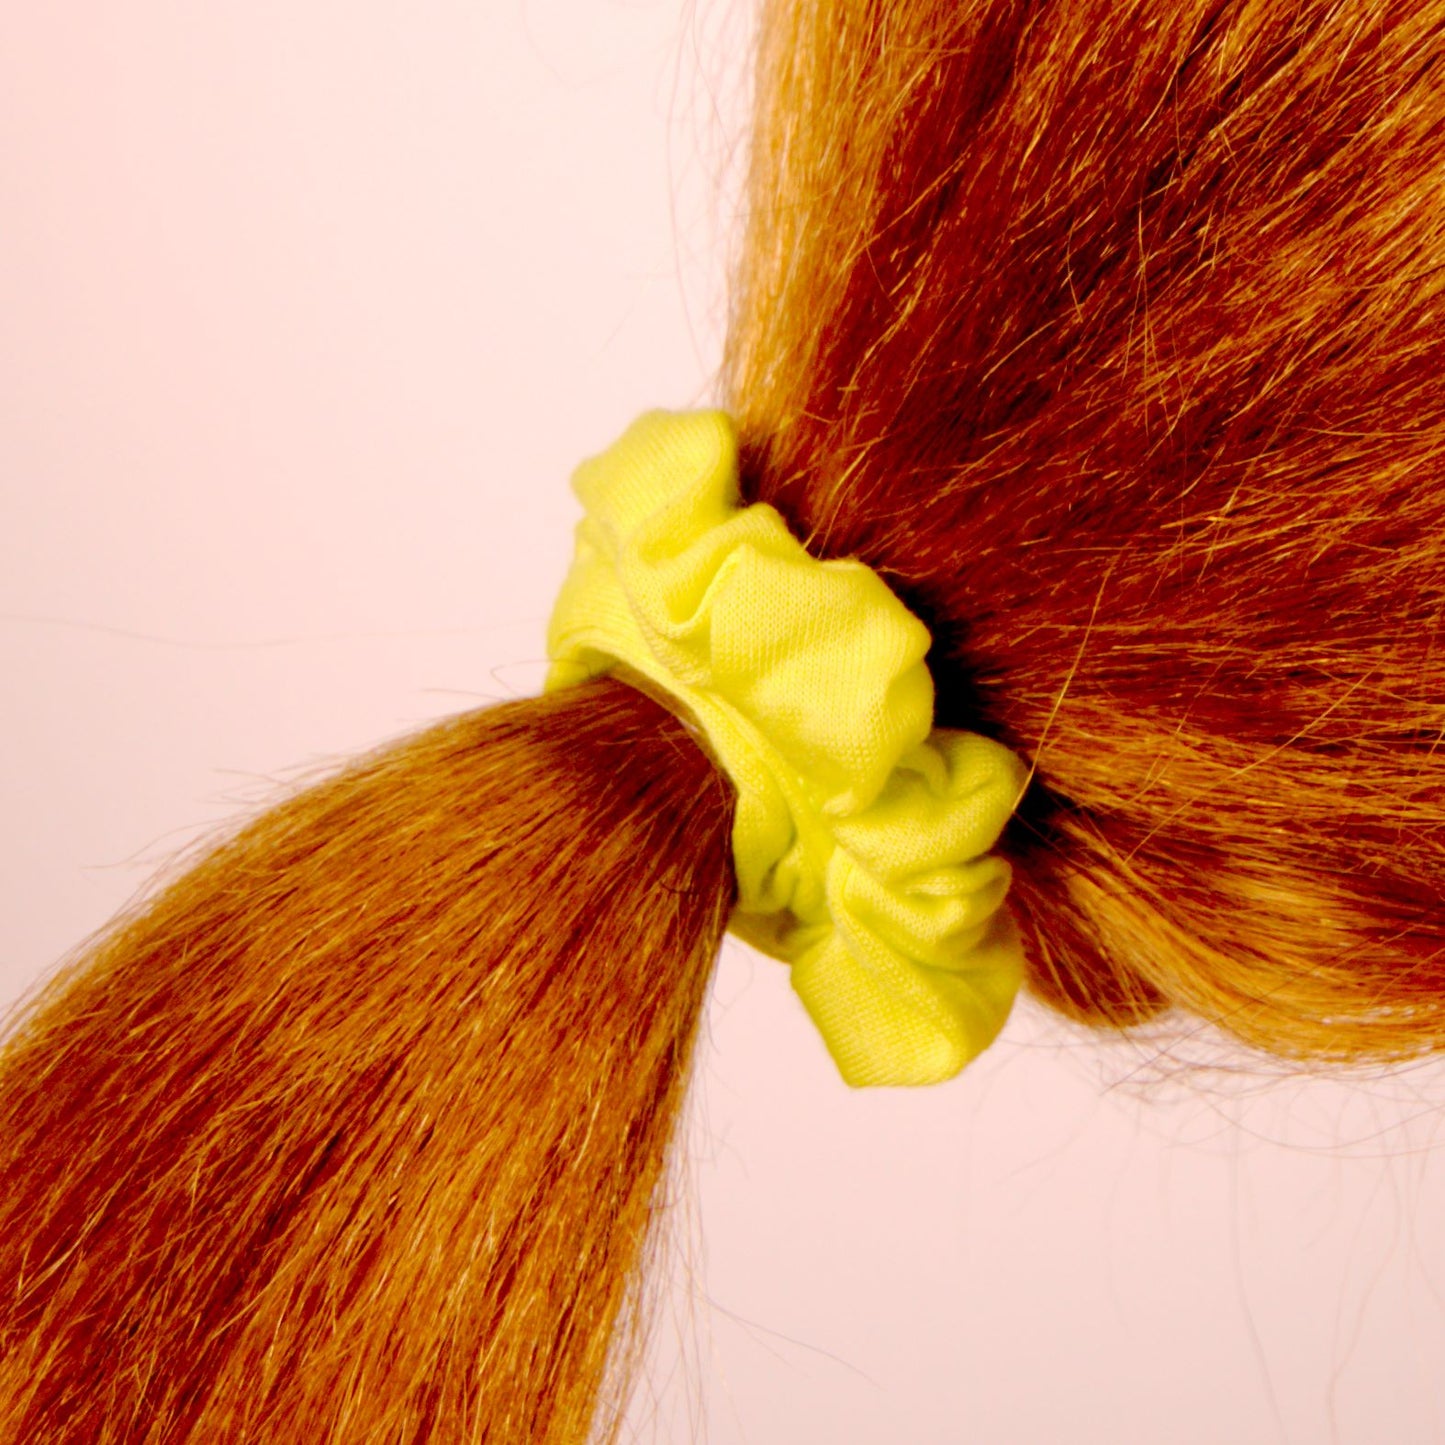 Amelia Beauty, Medium Neon Yellow Jersey Scrunchies, 2.5in Diameter, Gentle on Hair, Strong Hold, No Snag, No Dents or Creases. 10 Pack